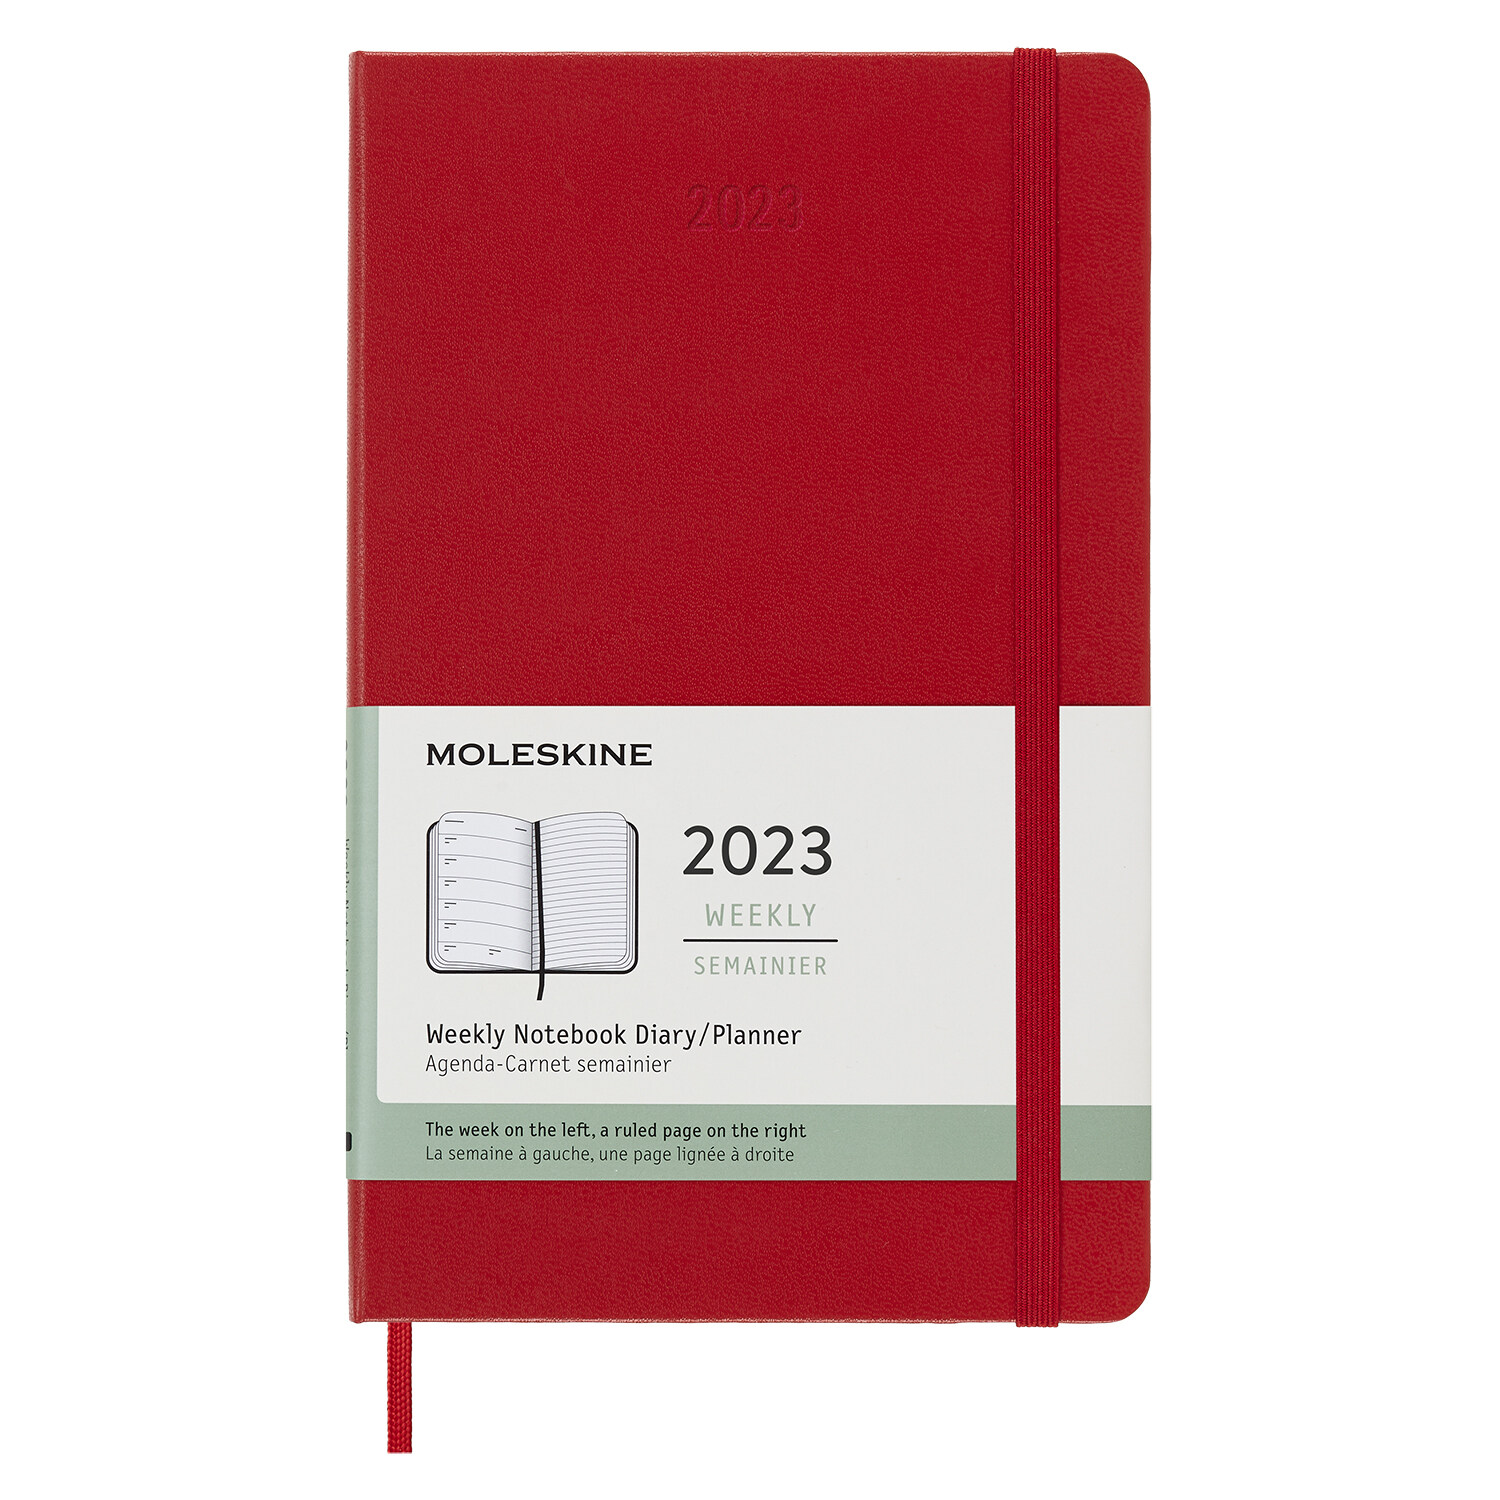 Moleskine 2023 Weekly Notebook Planner, 12m, Large, Scarlet Red, Hard Cover (5 X 8.25) (Other)